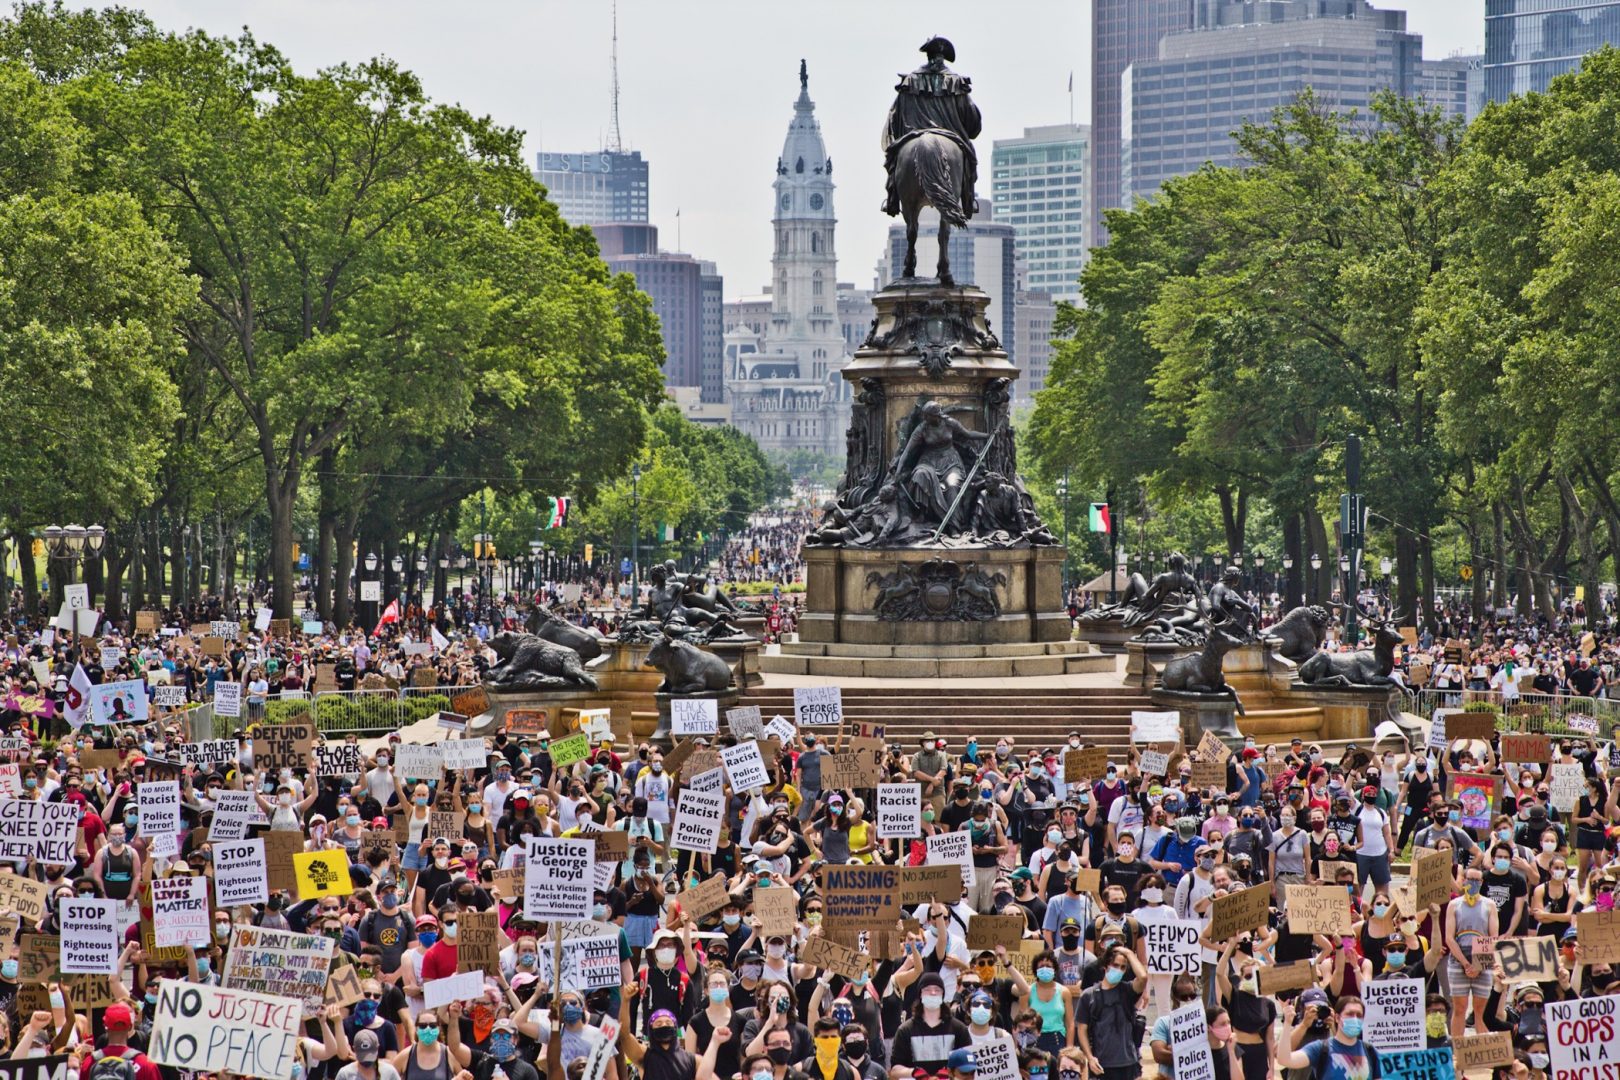 Protesters took over the Benjamin Franklin Parkway Saturday to hear speakers from the Philly Socialists, who along with demanding an end to police brutality and justice for George Floyd, called for fair housing, libraries, and healthcare for all. 